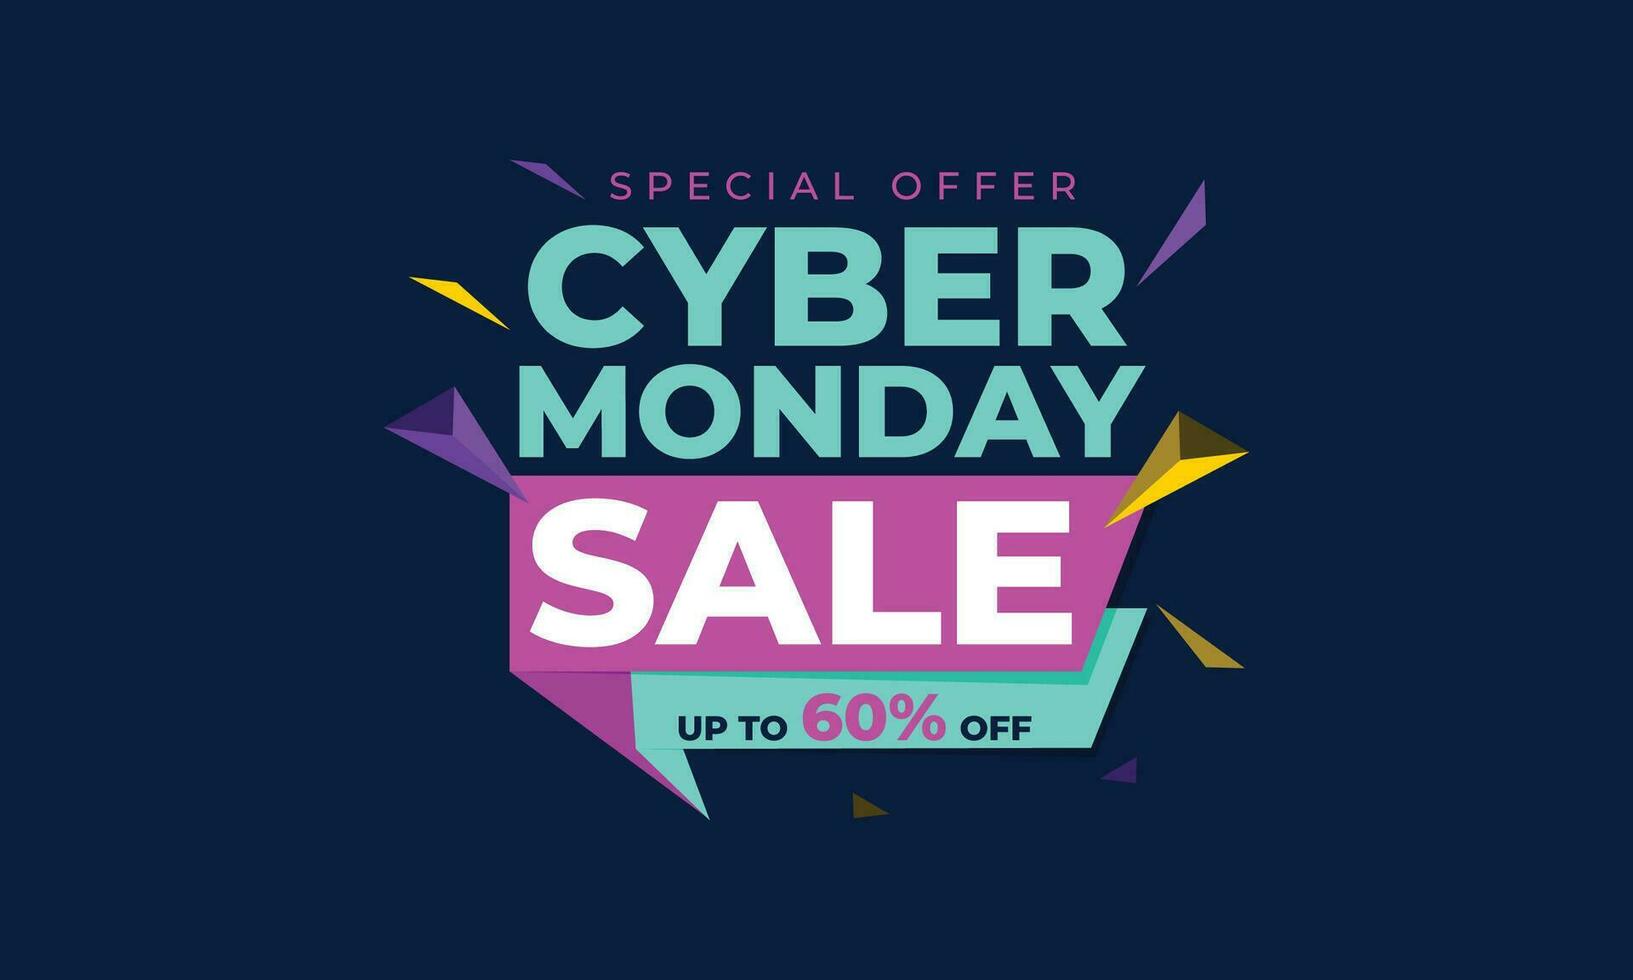 Cyber Monday Colorful Neon Style Super Sale Web Banner. Cyber Monday Sale Special Offer Social Media Post Design. Business, Promotion, and Advertising Vector Template. Seasonal Offers Mega Big Sale